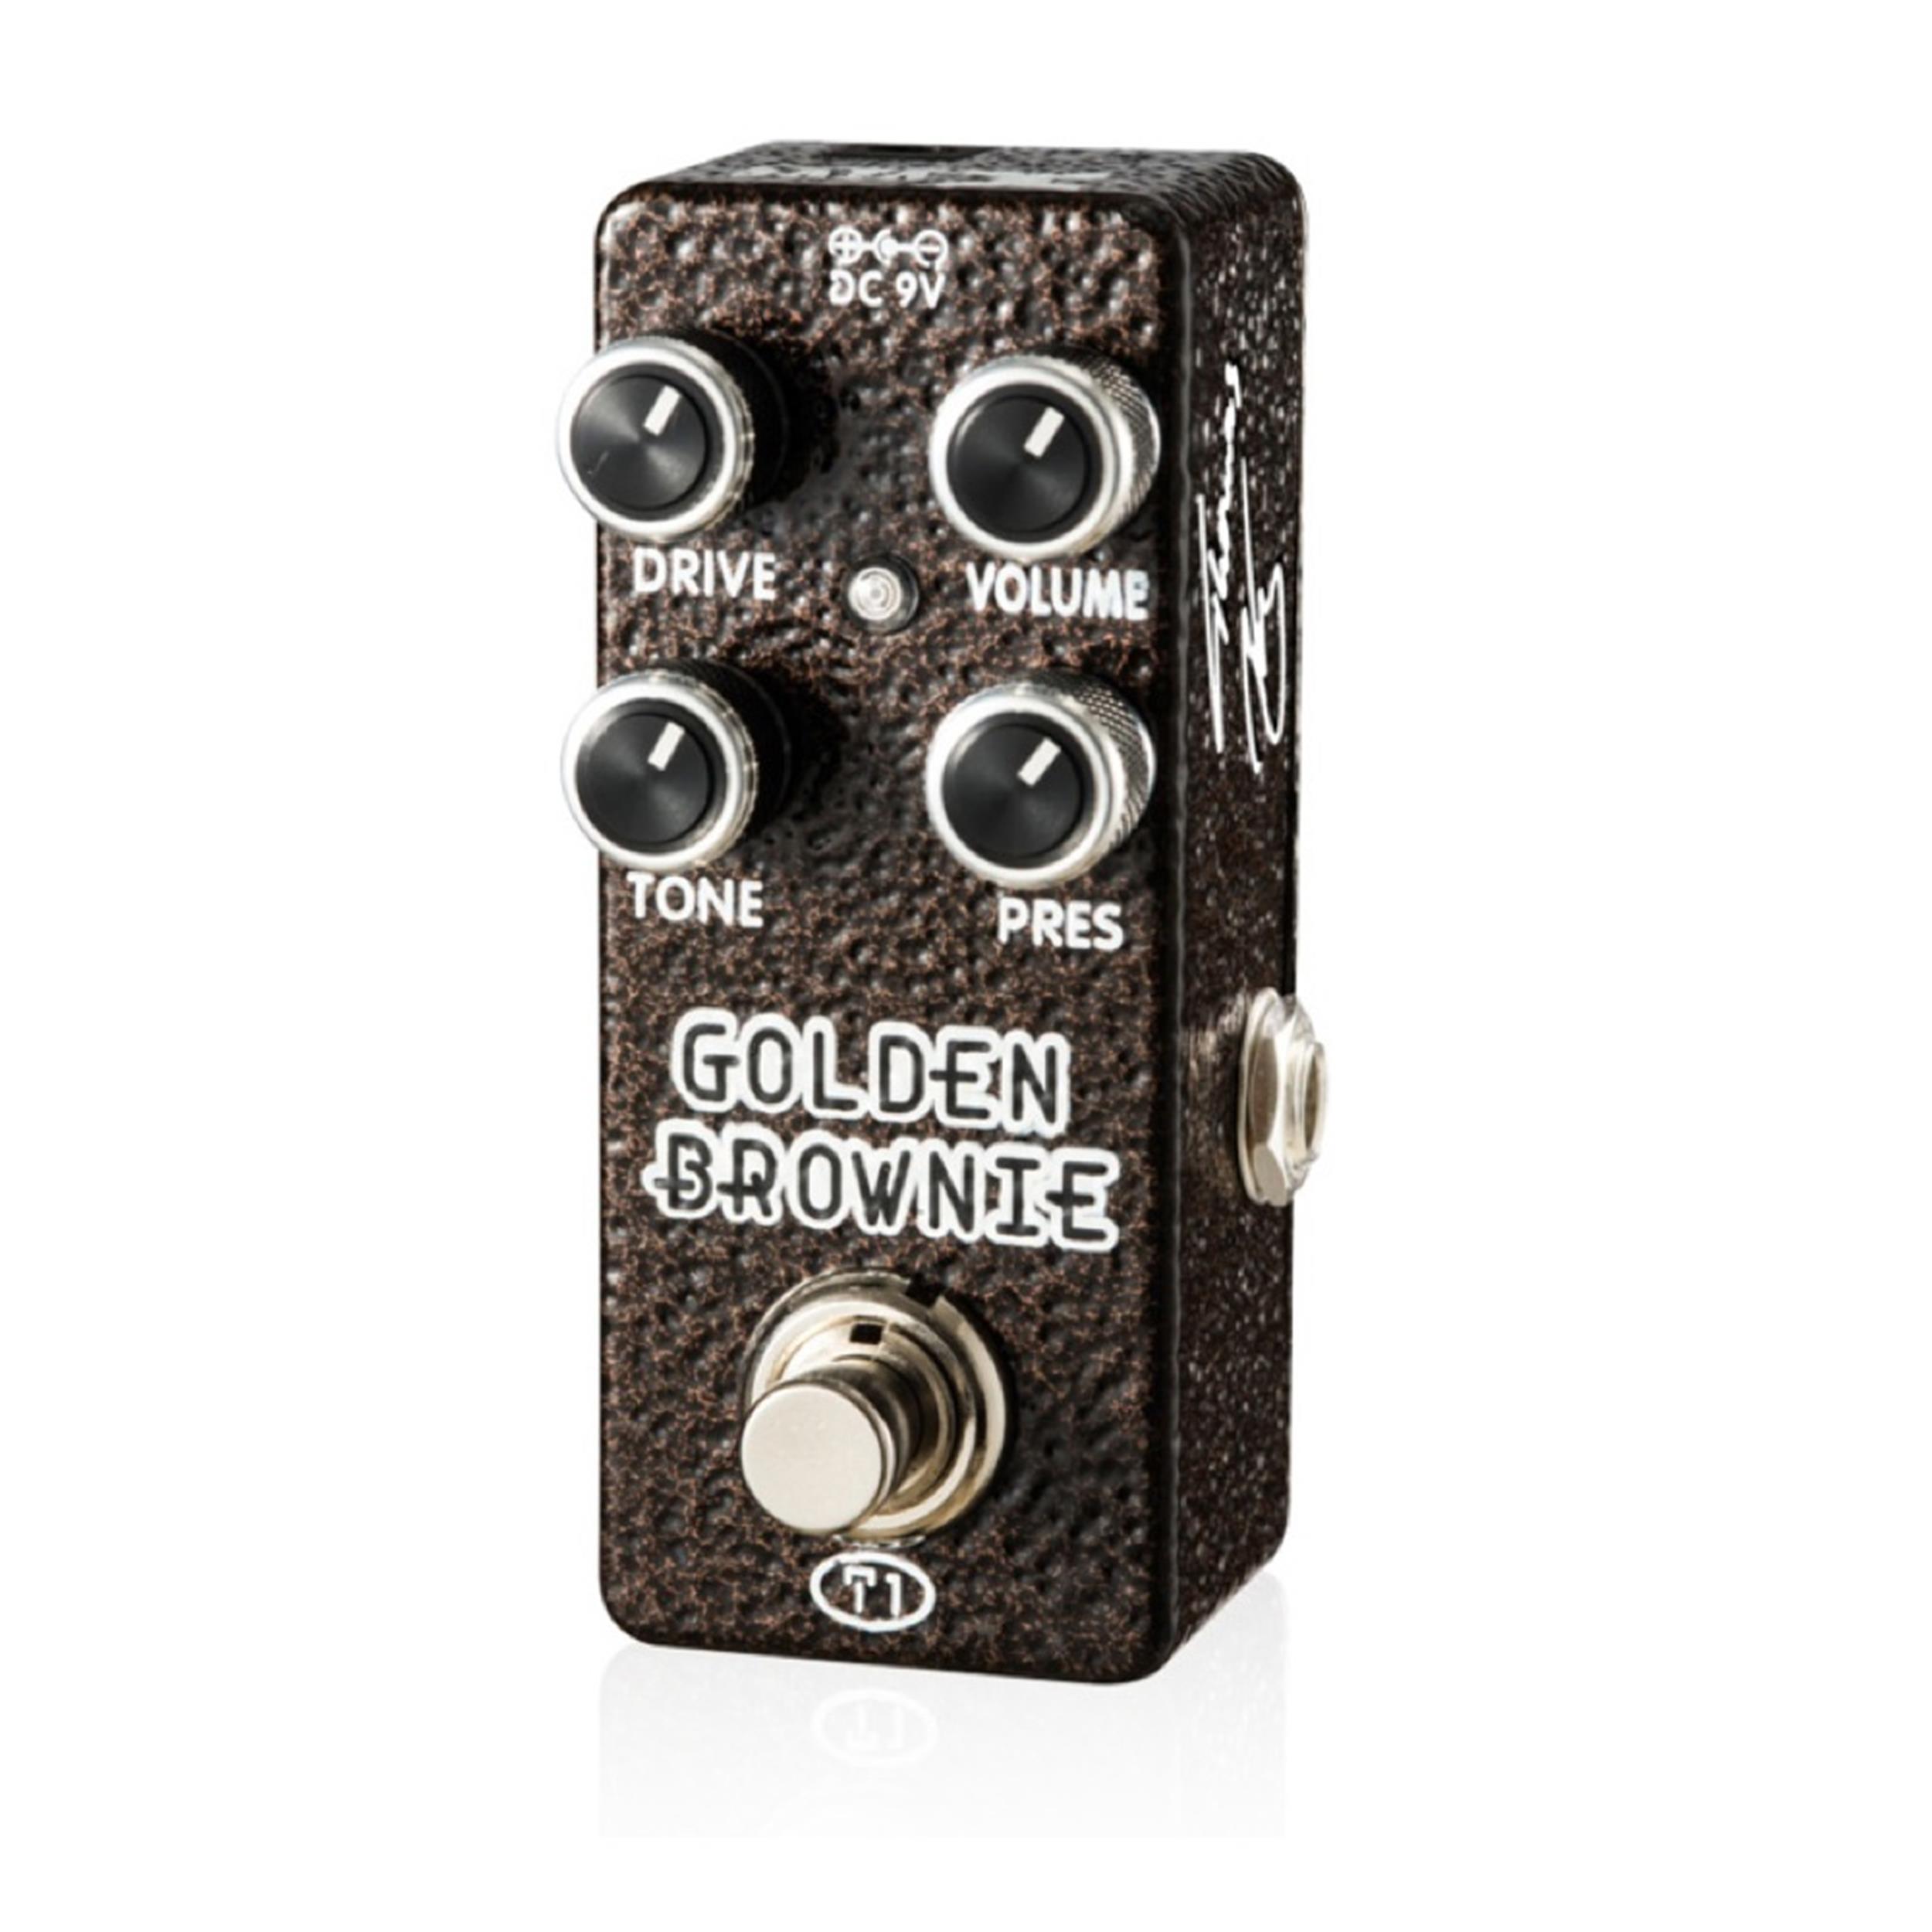 XVIVE T1 GOLDEN BROWNIE OVERDRIVE